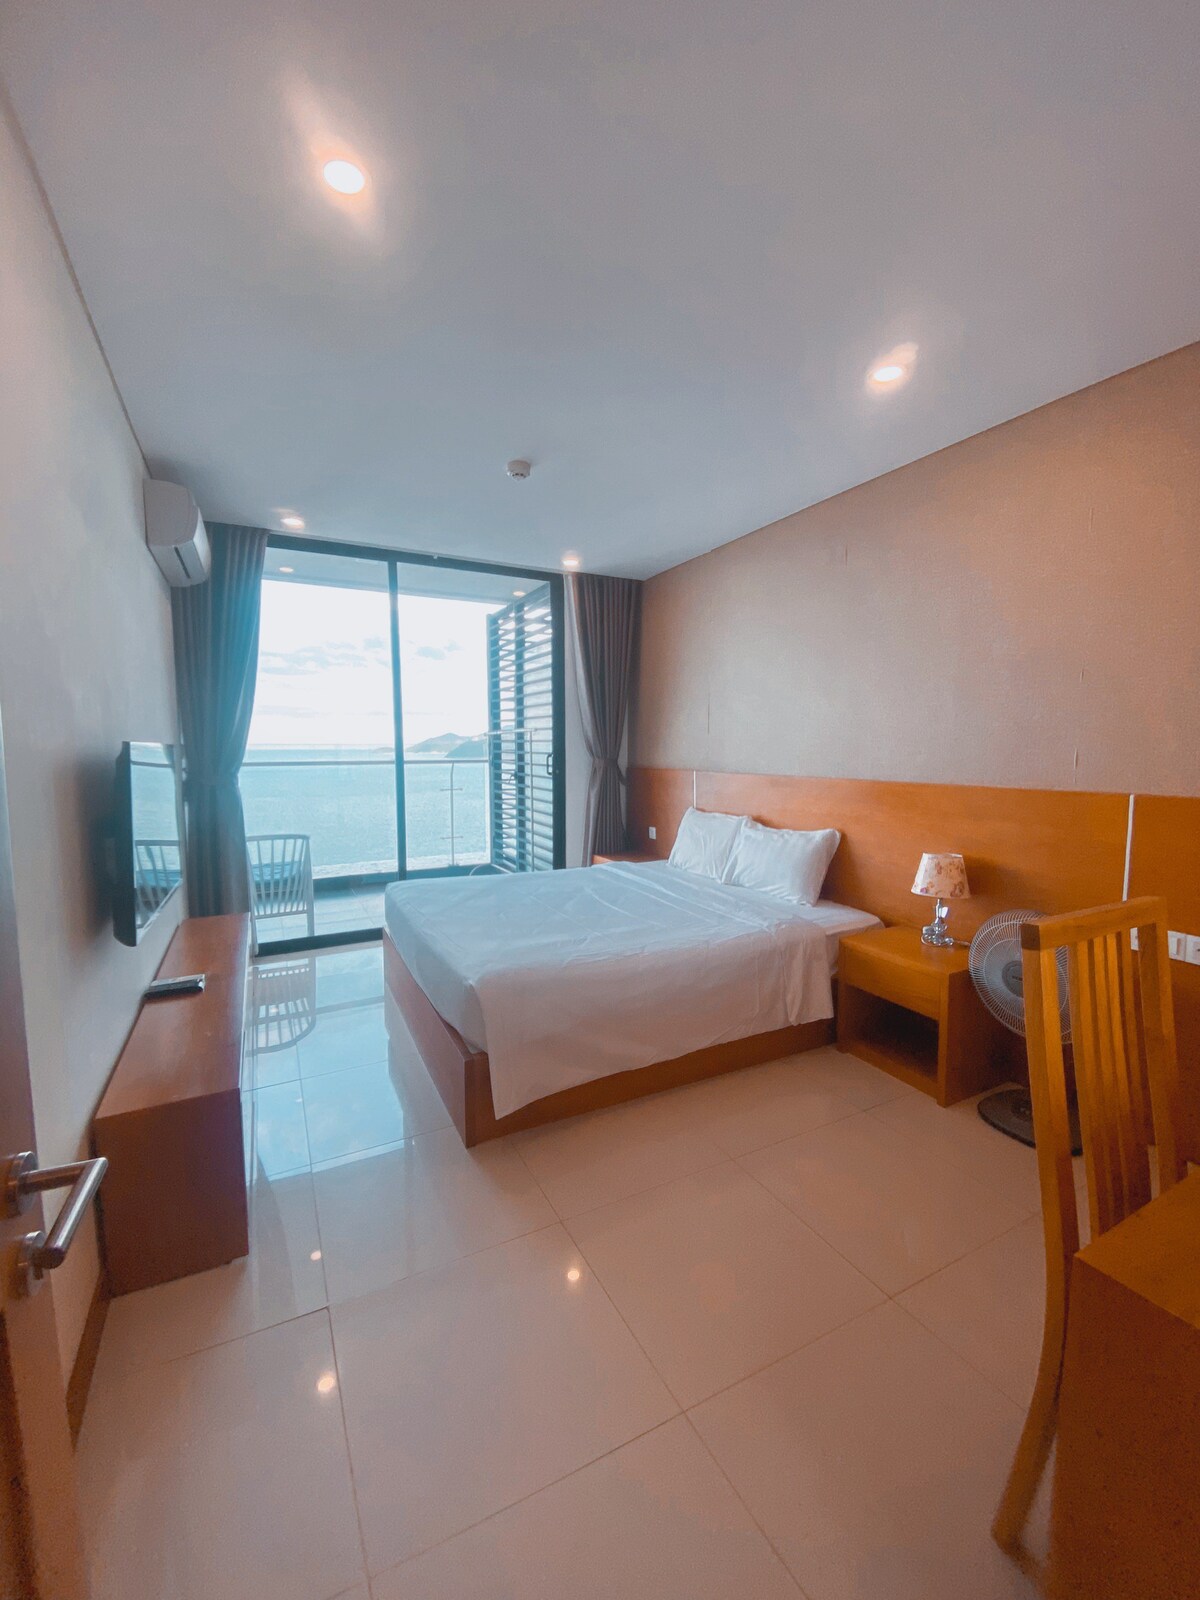 Sea view balcony 1 bedroom apartment in central